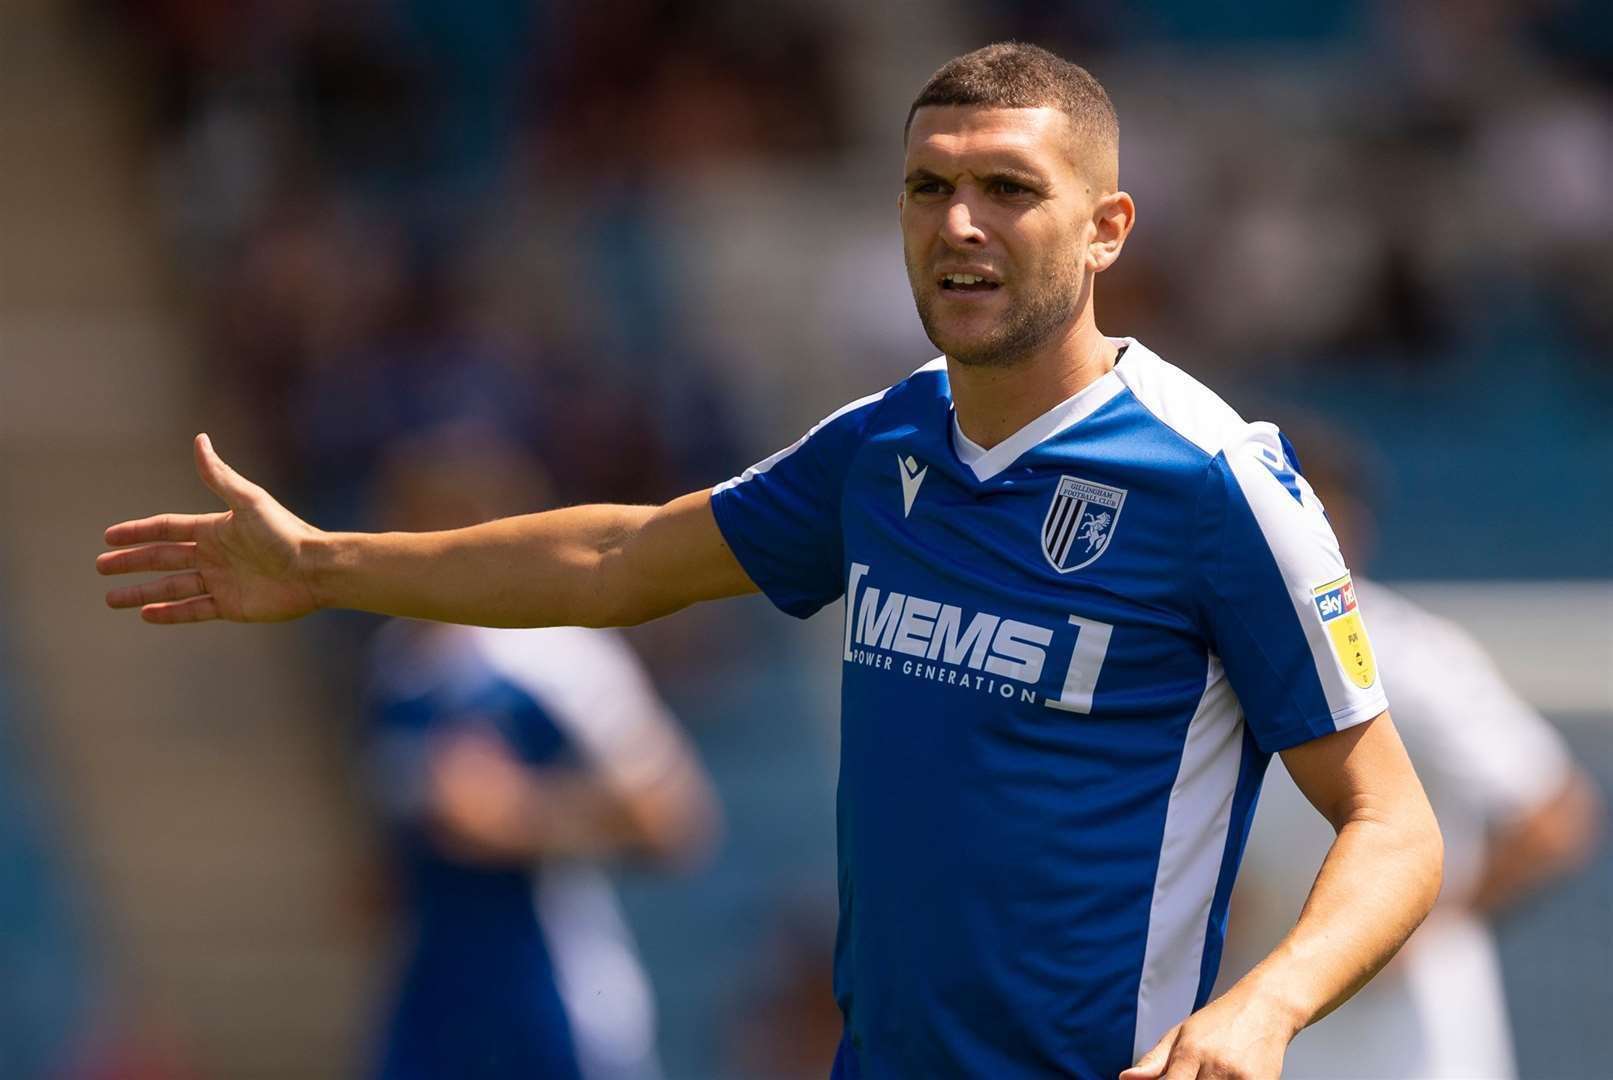 Gillingham captain Stuart O'Keefe will be leaving the club this summer